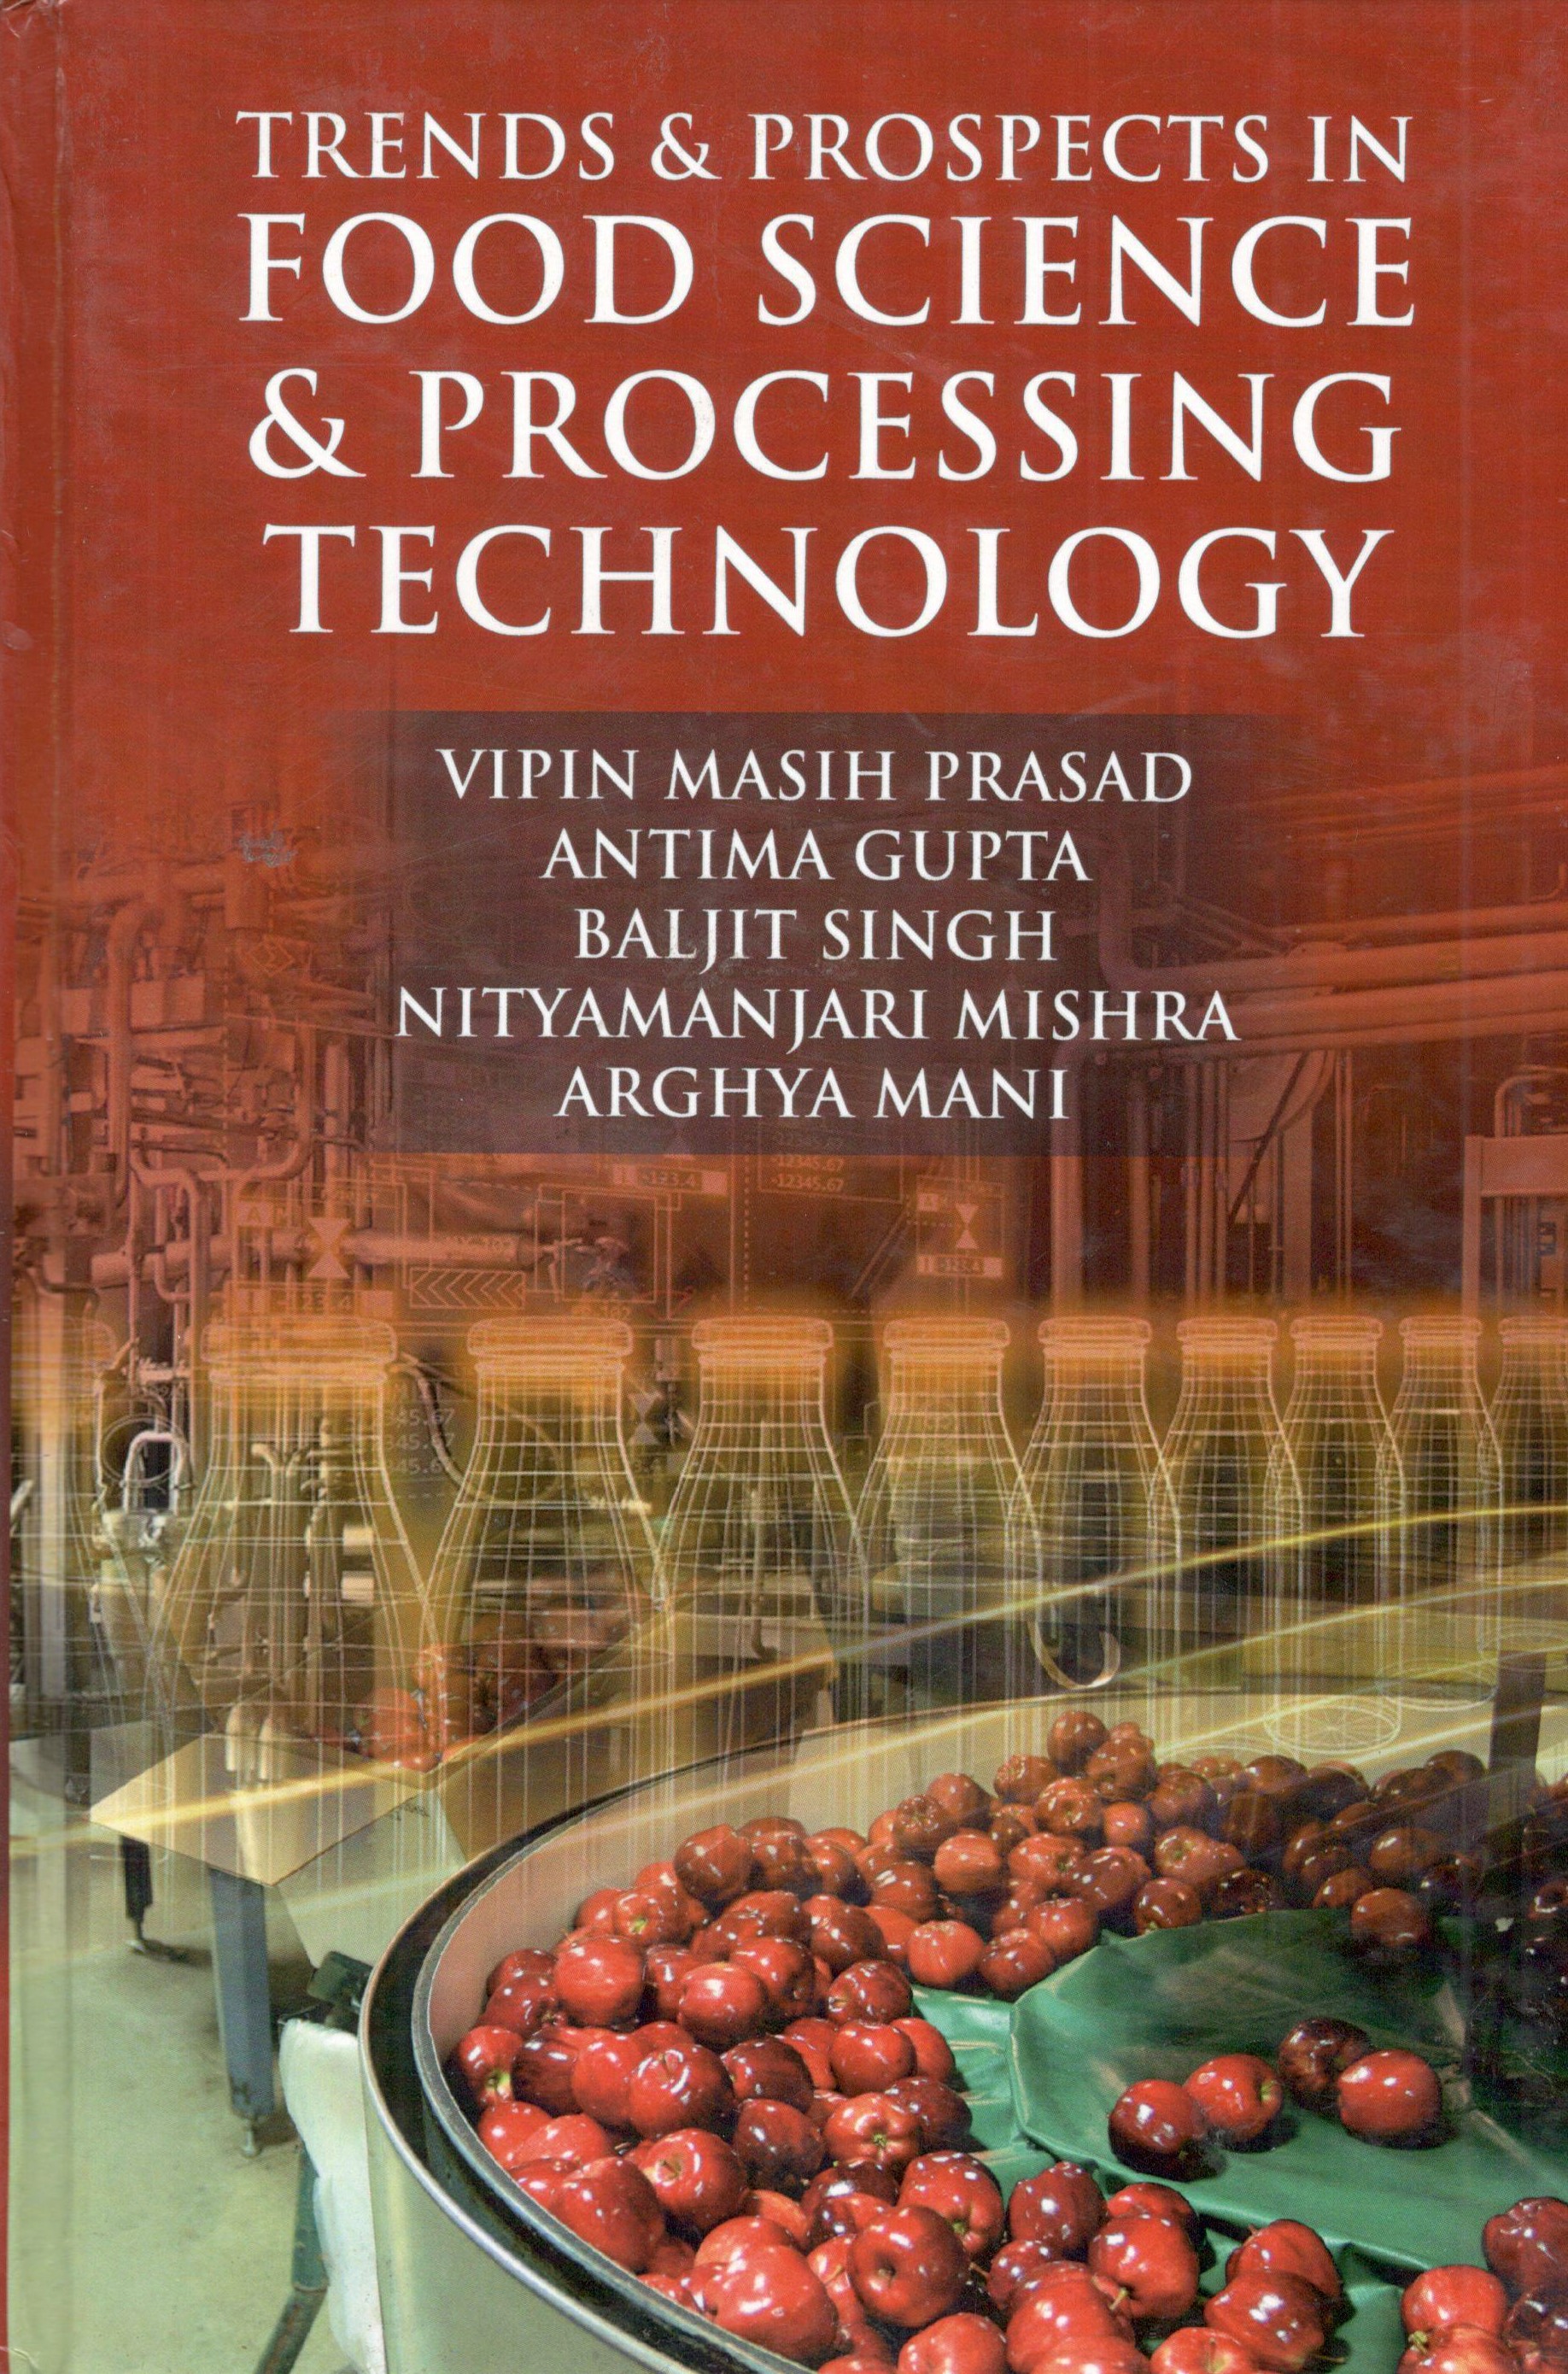 Trends & Prospects in Food Science & Processing Technology